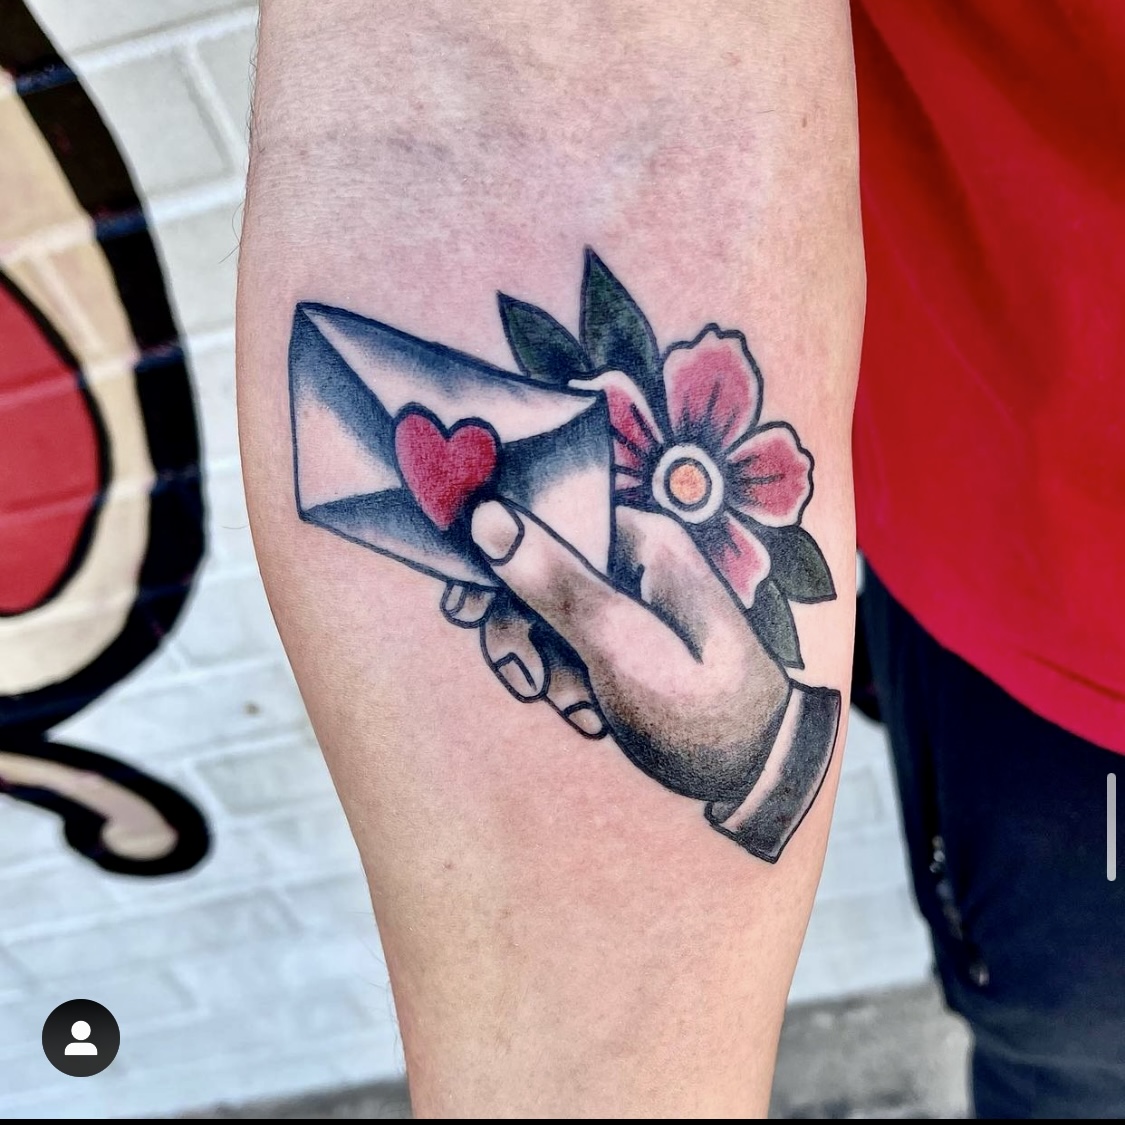 Tattoo of a hand with a letter in it from Dallas Tattoo artist